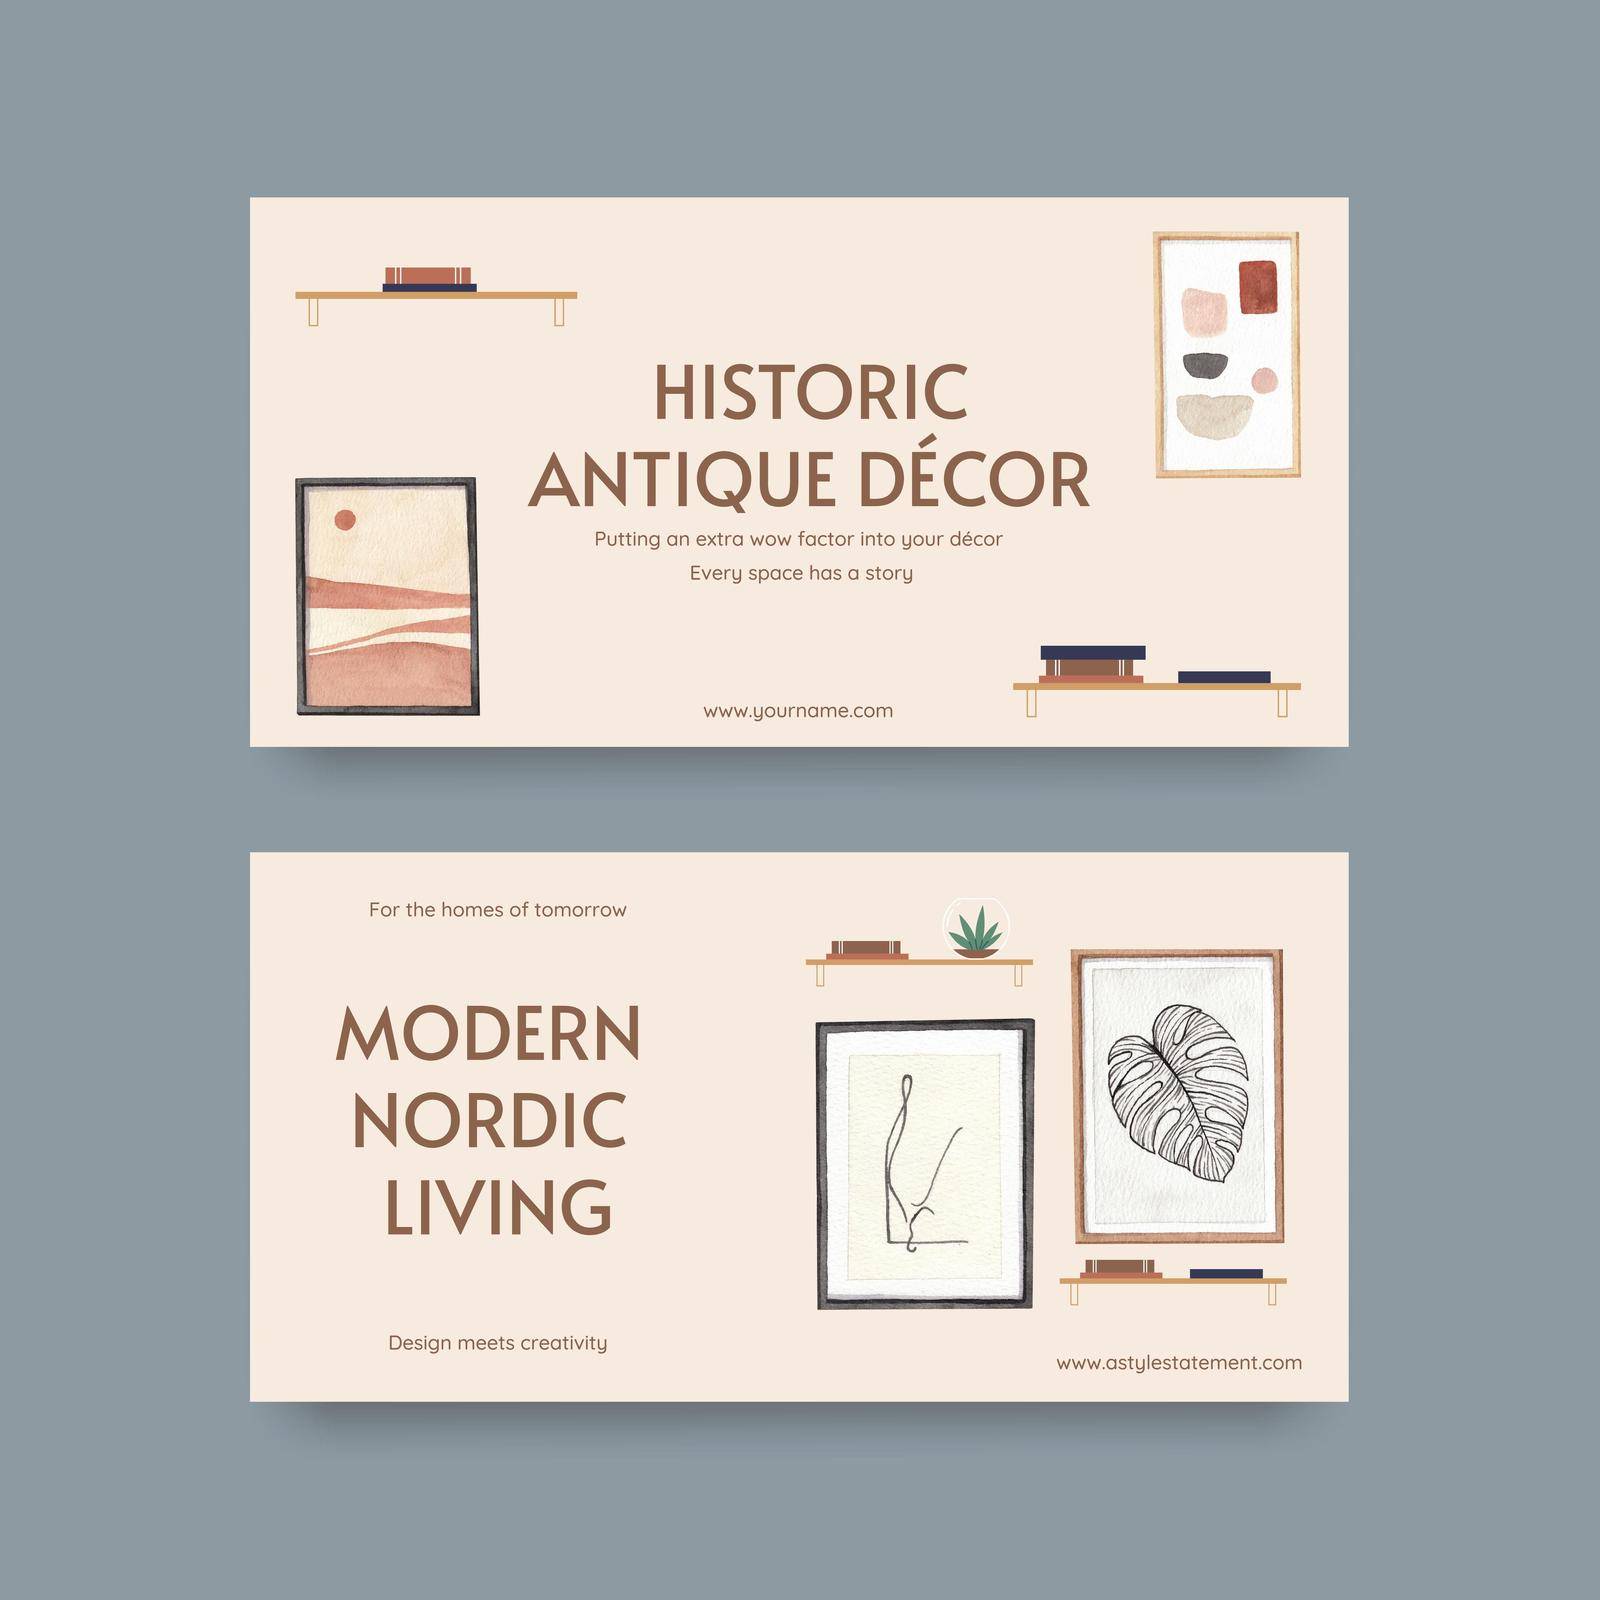 Twitter template with nordic antique home concept,watercolor style